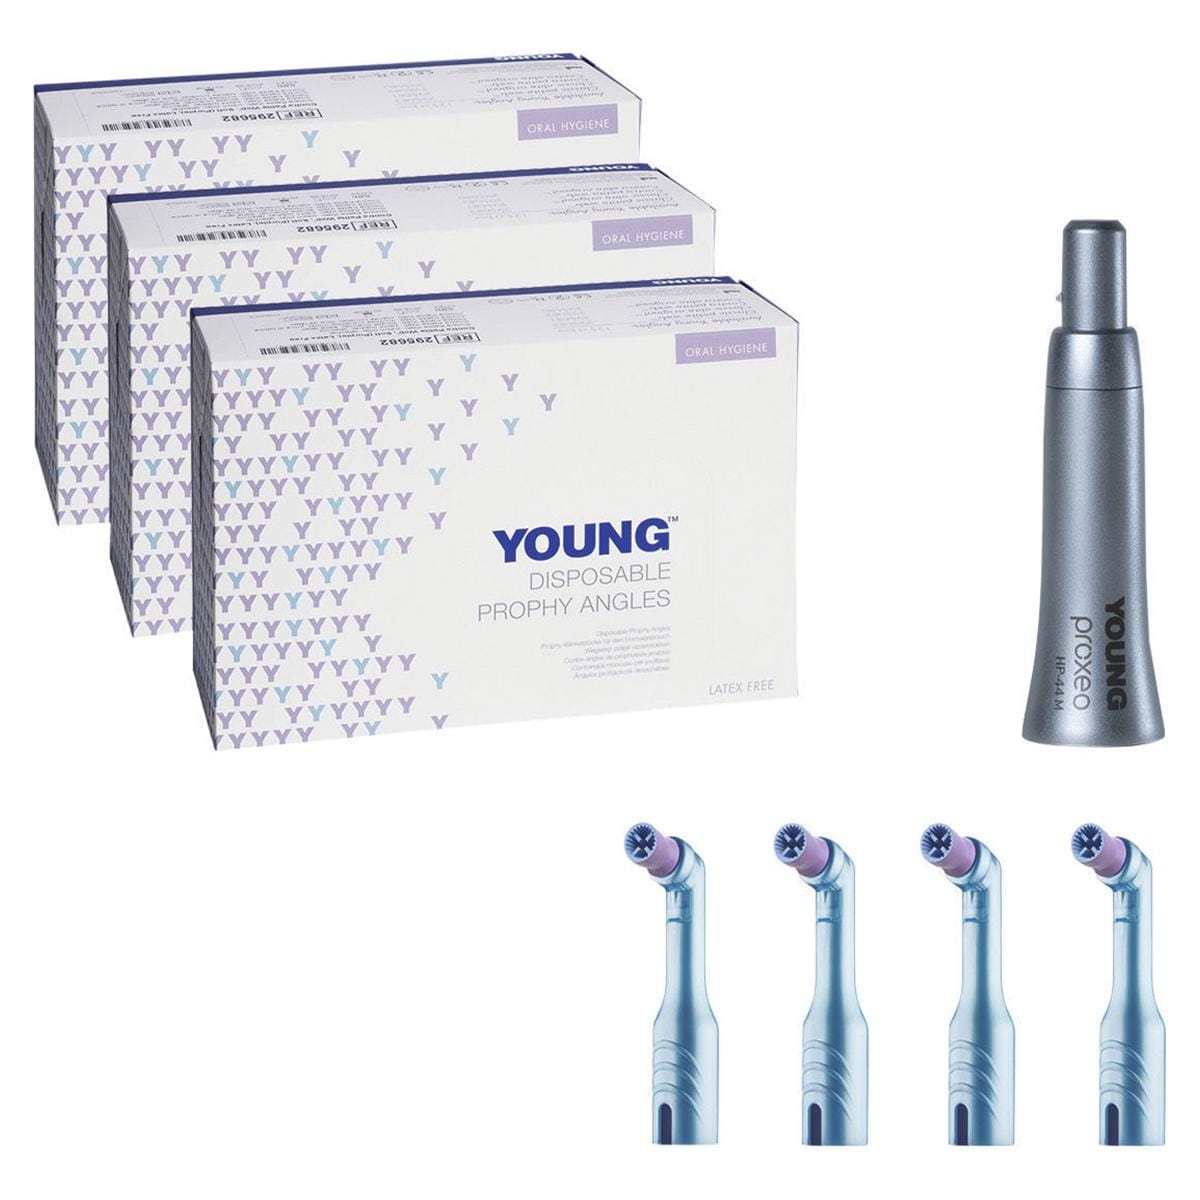 Disposable Prophy Angles Contra Petite Web Soft Starter Kit - YDNT03